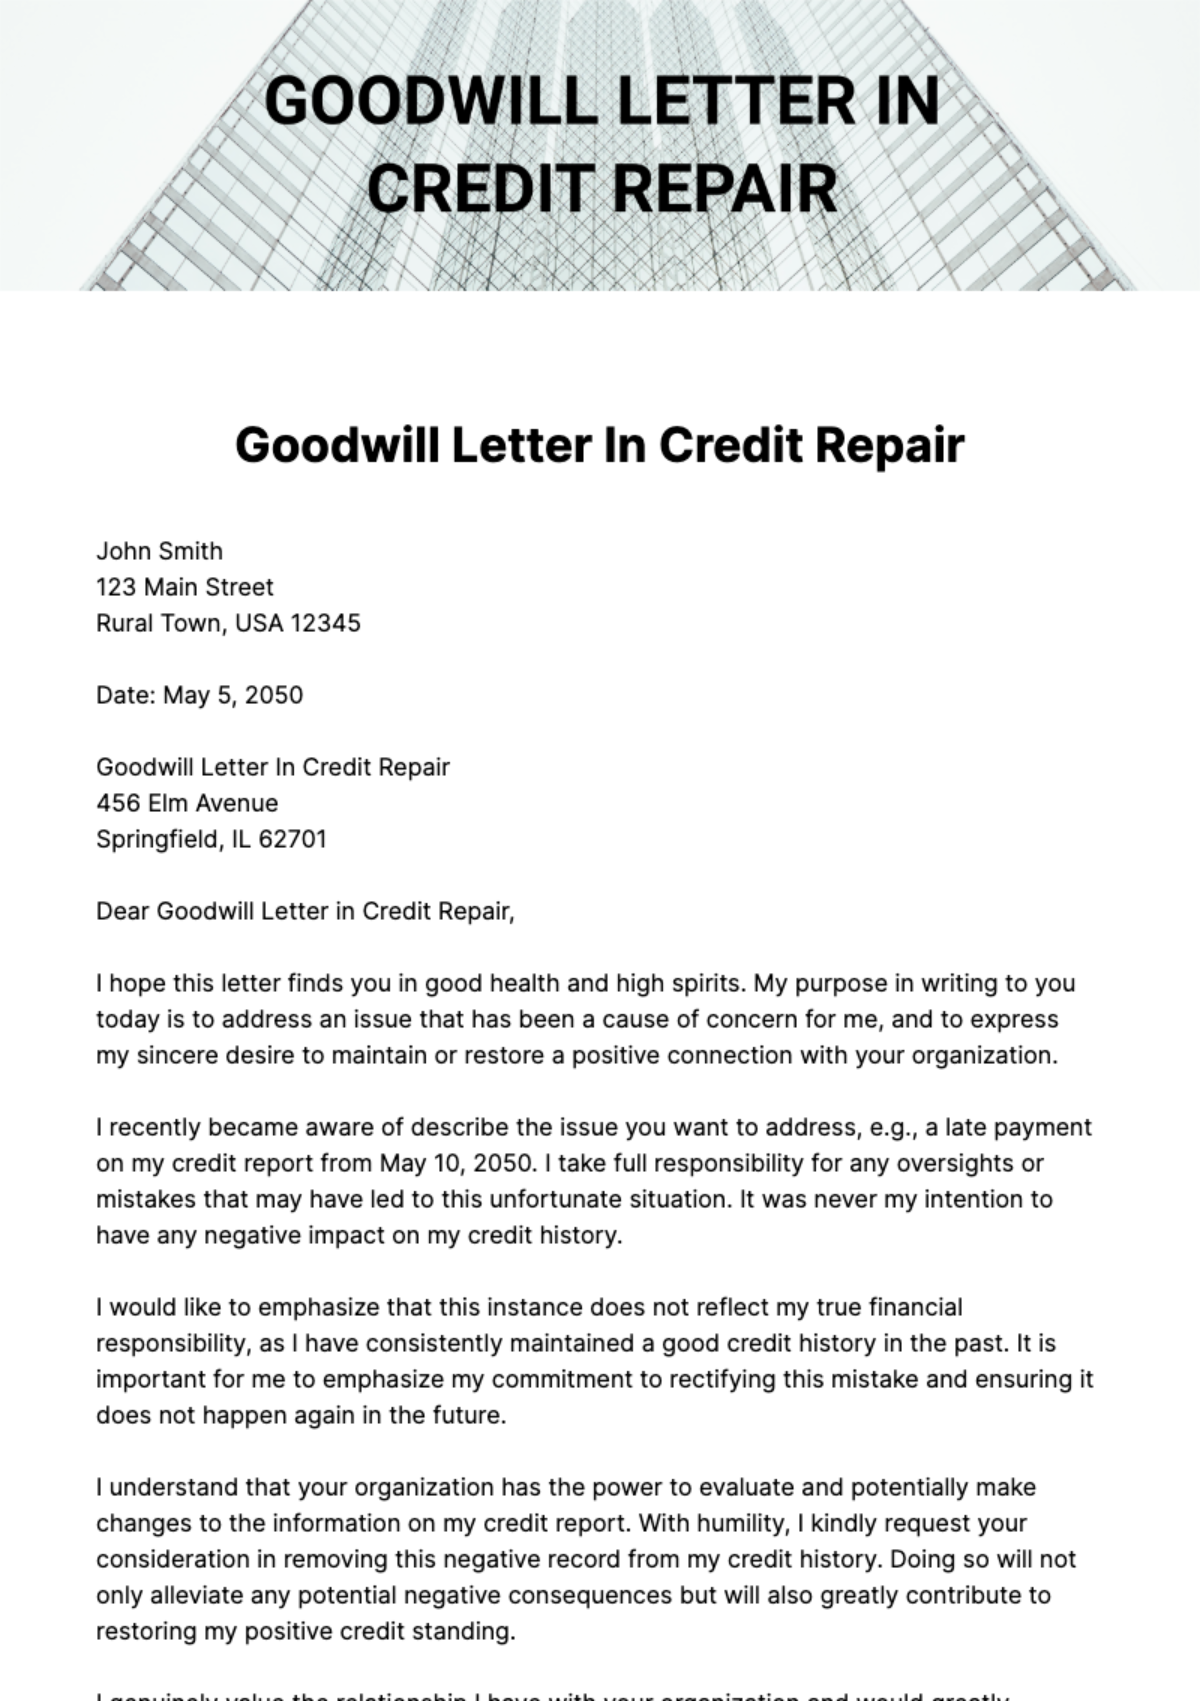 Goodwill Letter In Credit Repair Template